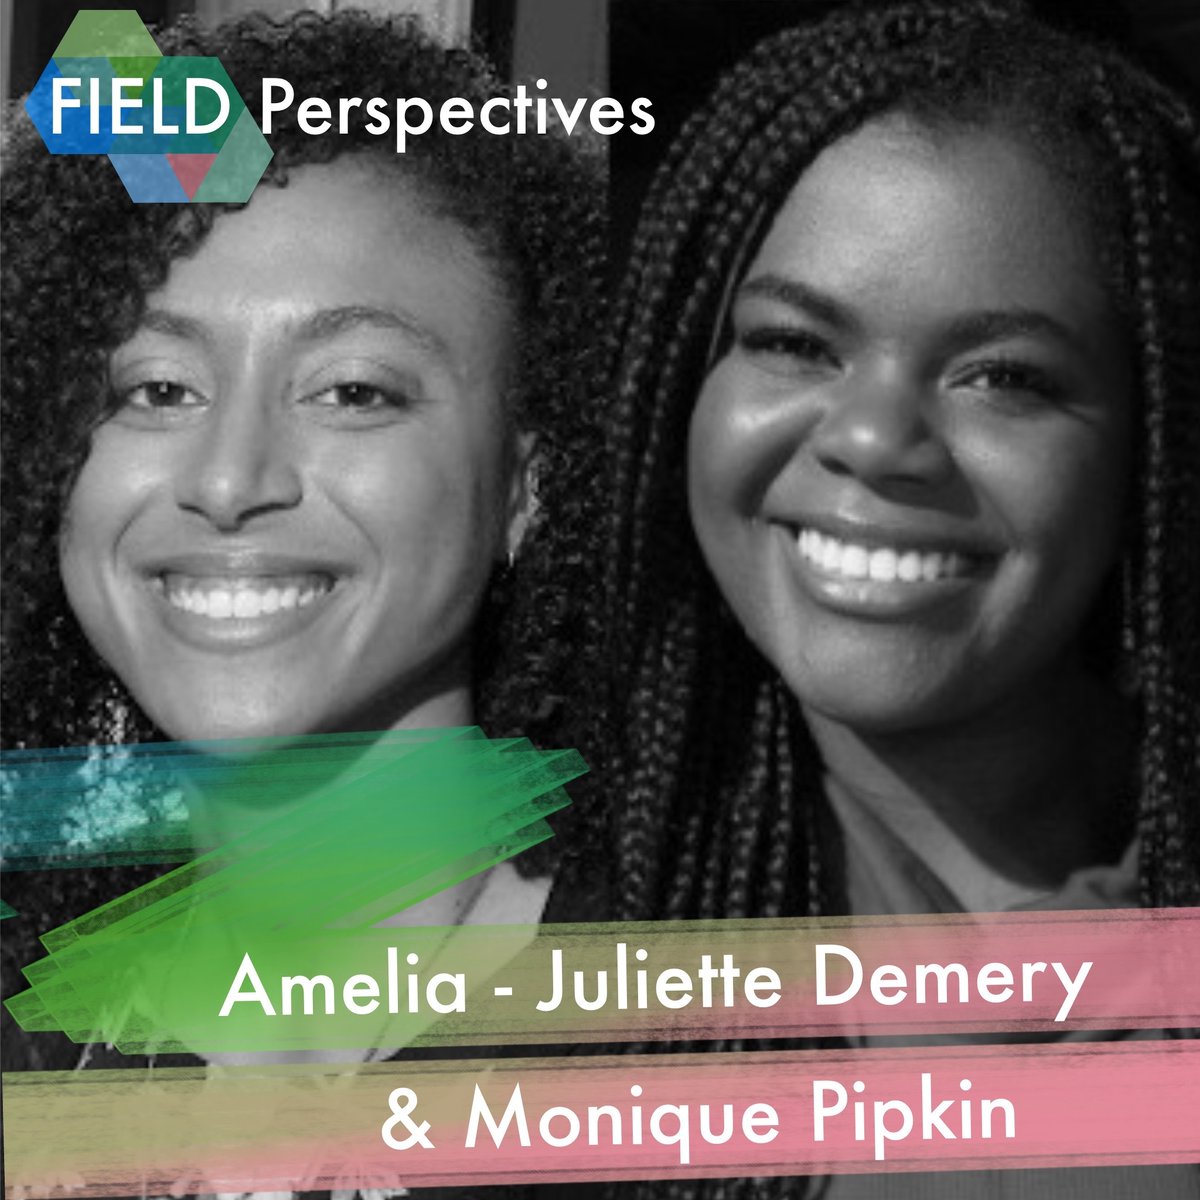 Outlook by @acdemery @MoniquePipkin on recontextualizing identity with fieldwork🌈 By failing to acknowledge diversity 'we fail to...provide support for marginalized identities within a space that was not historically designed with inclusivity as a value' fieldperspectives.org/DemeryPipkin.h…